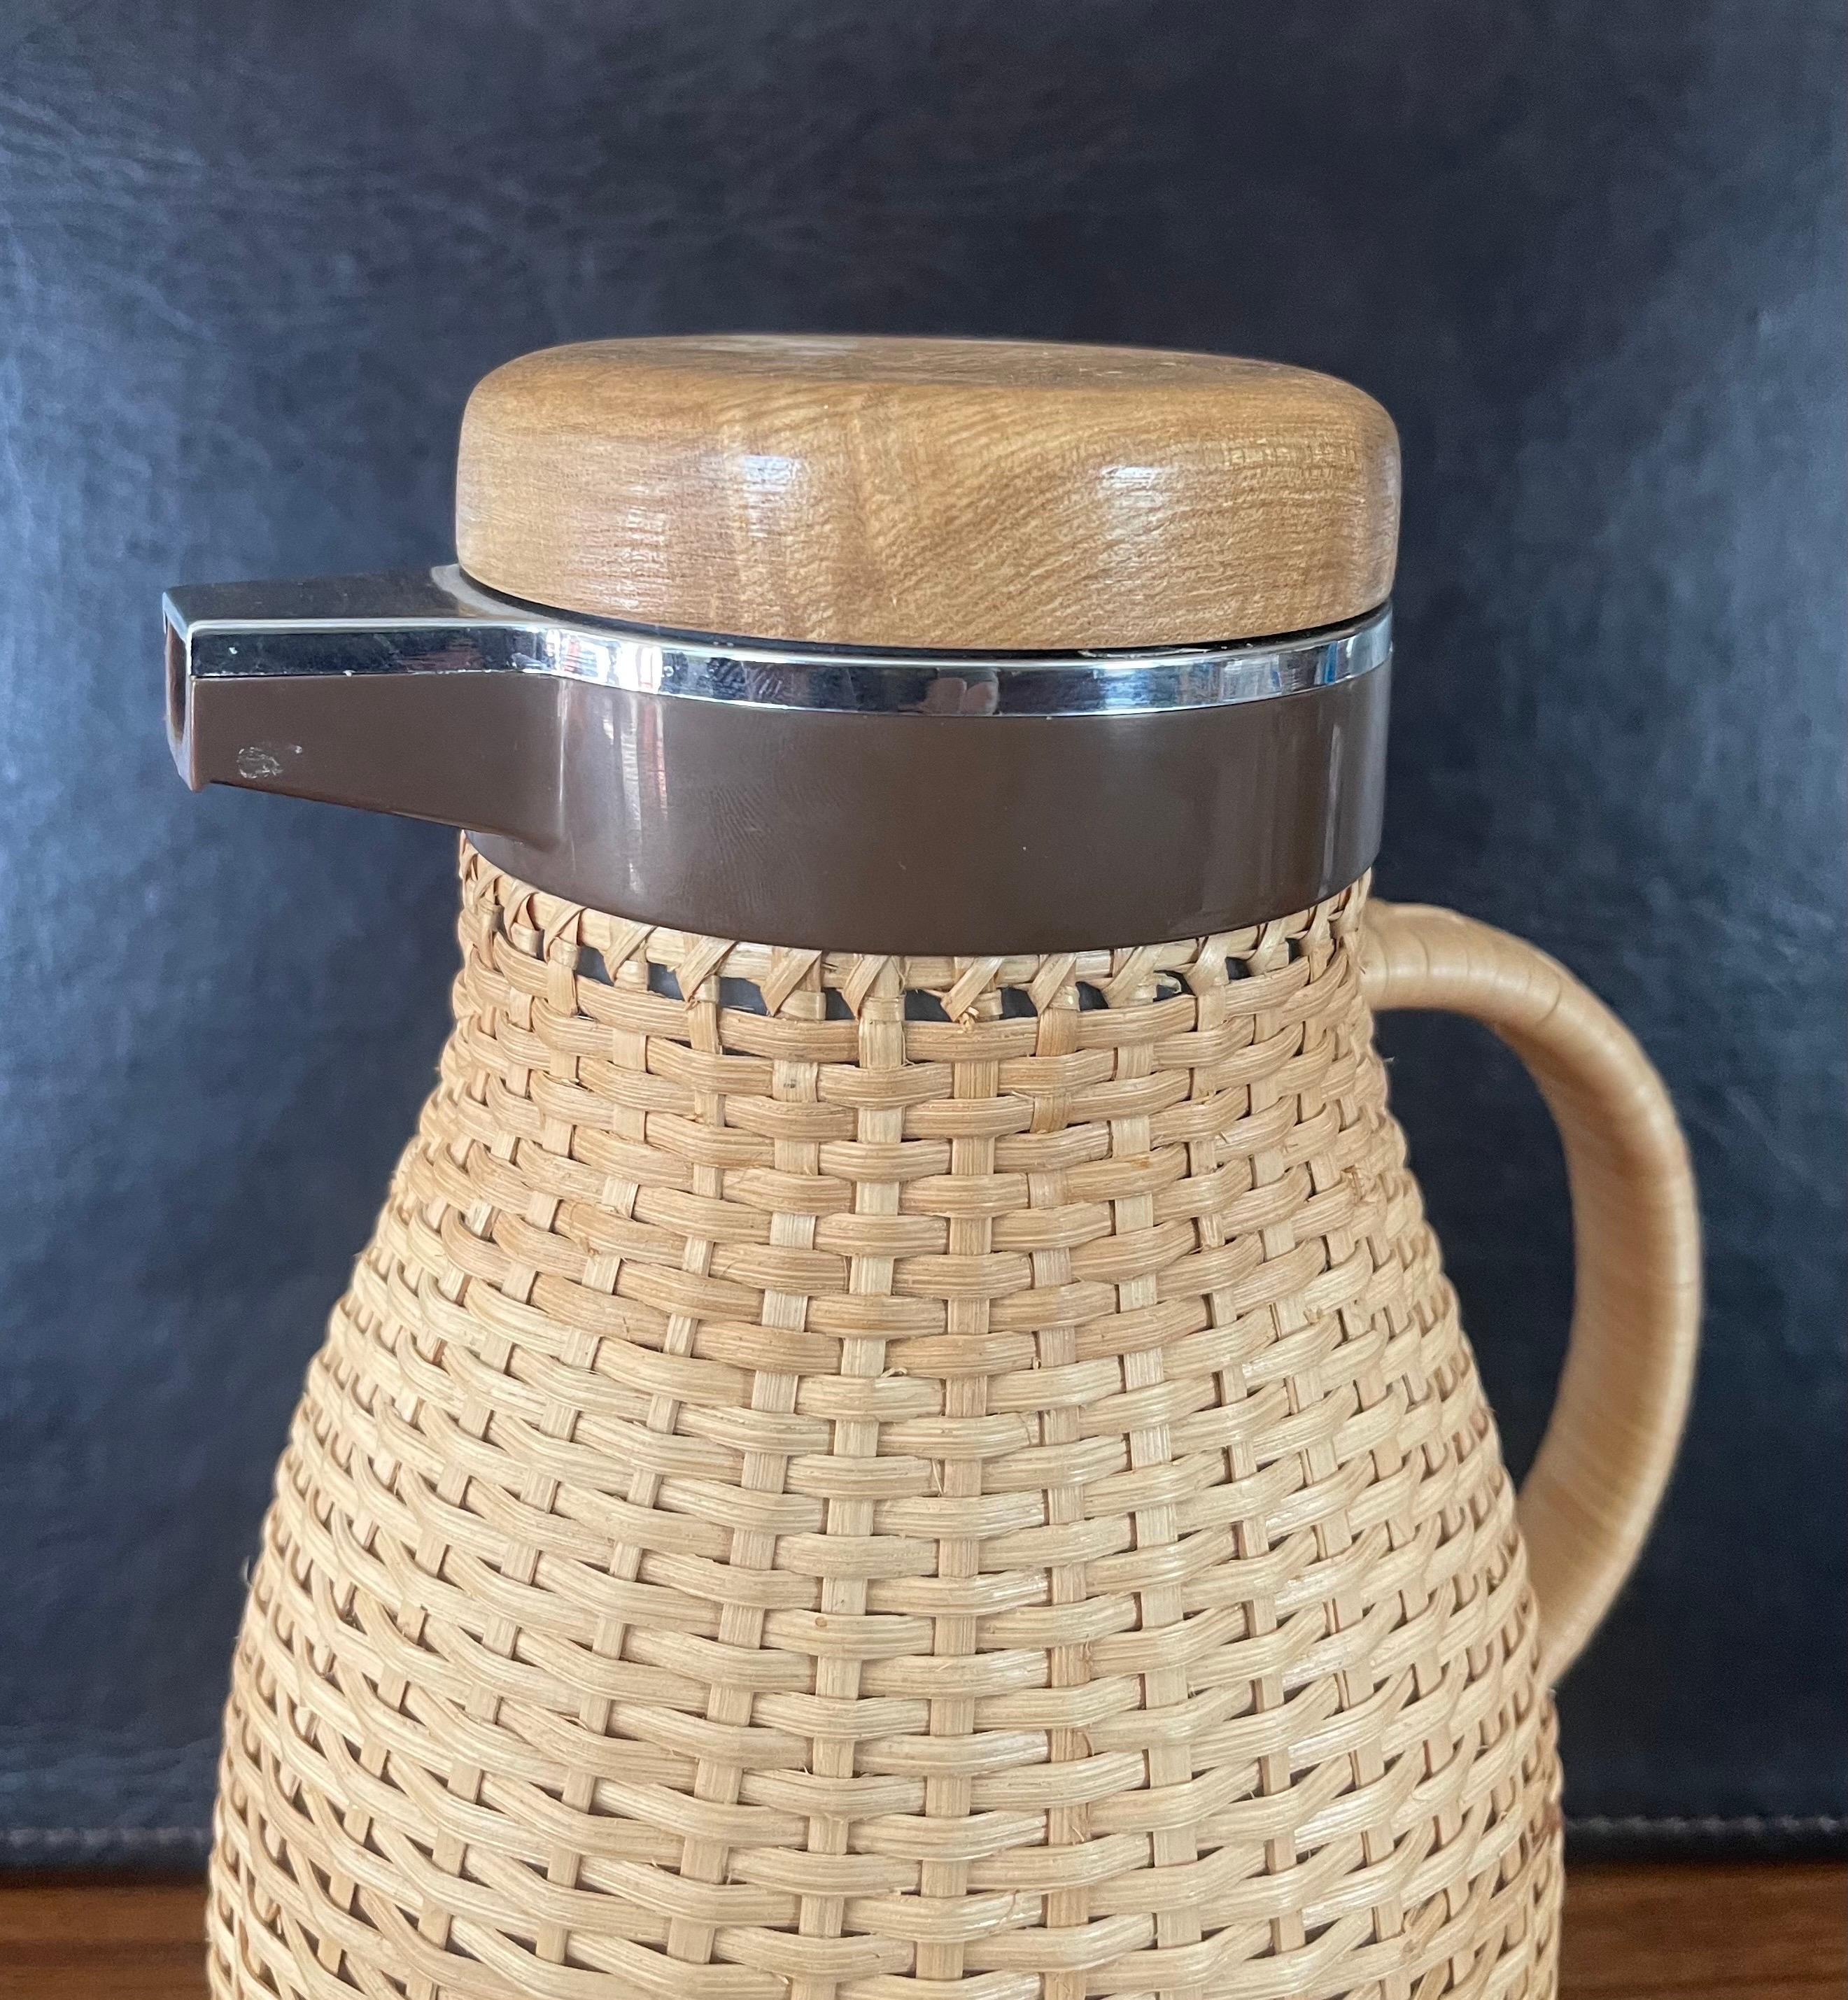 Japanese MCM Wicker Wrapped Thermos Coffee Carafe / Pitcher by Corning Designs